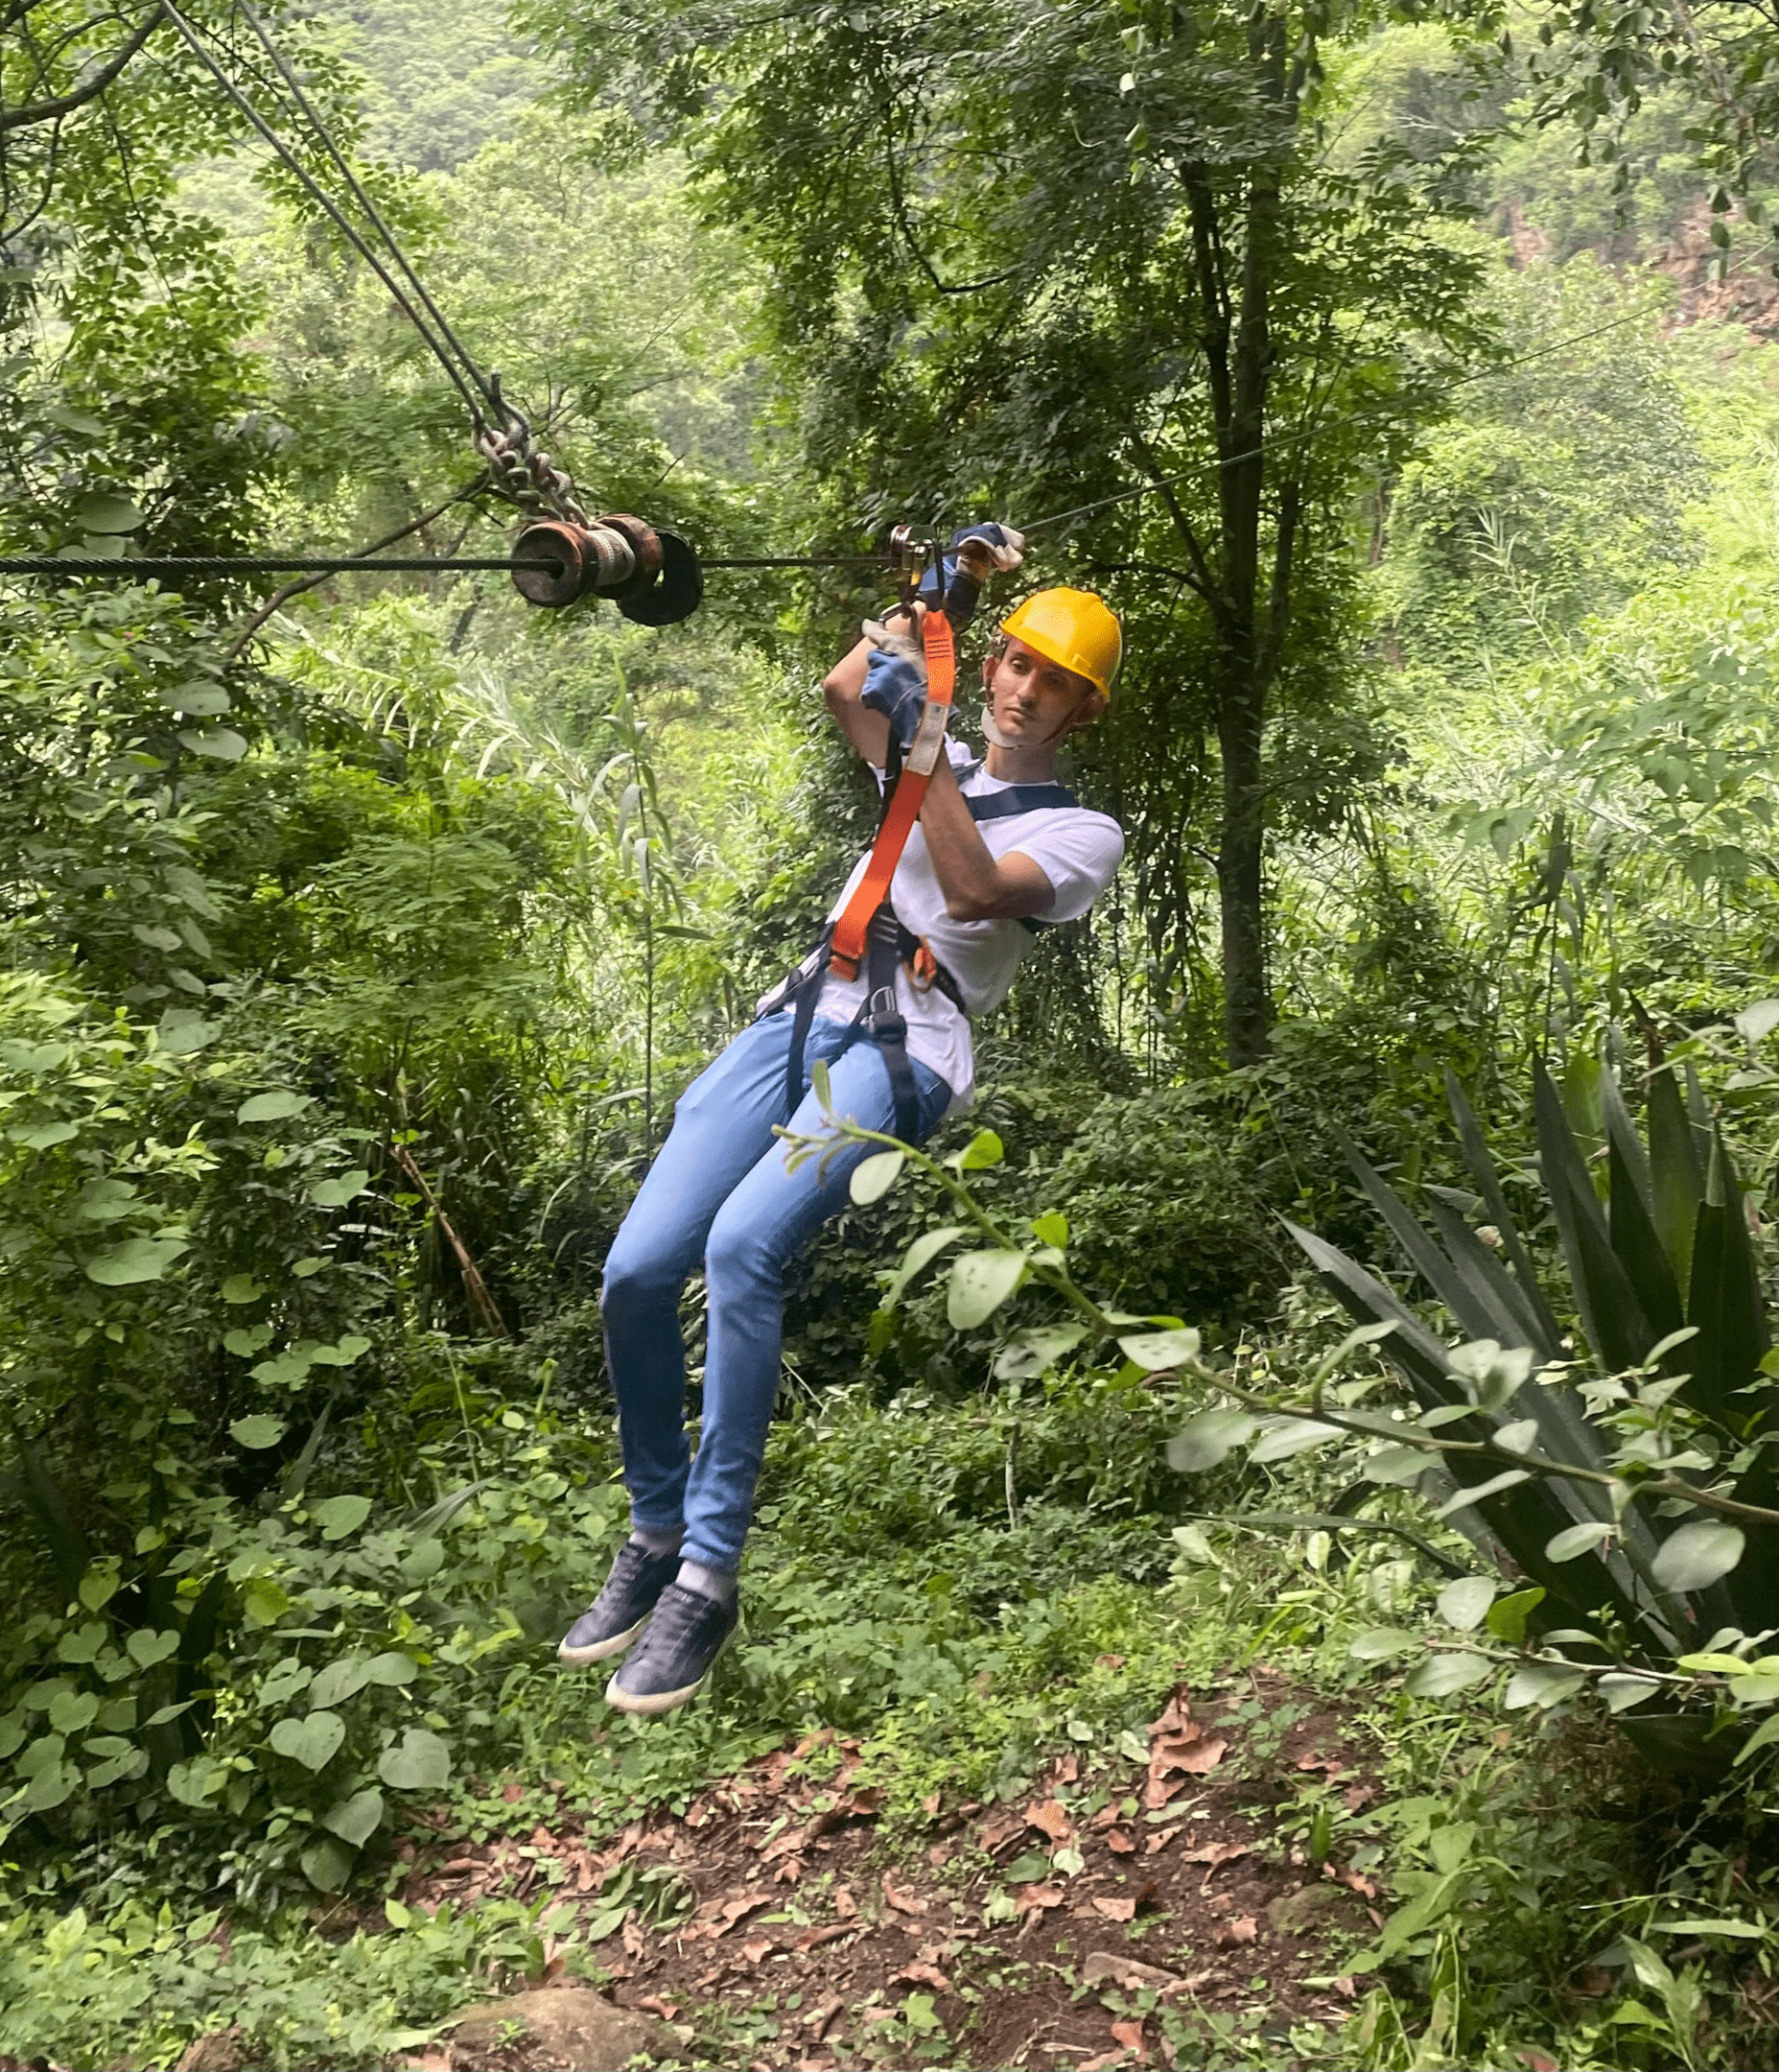 great and adrenaline experience on the extreme zipline adventure.